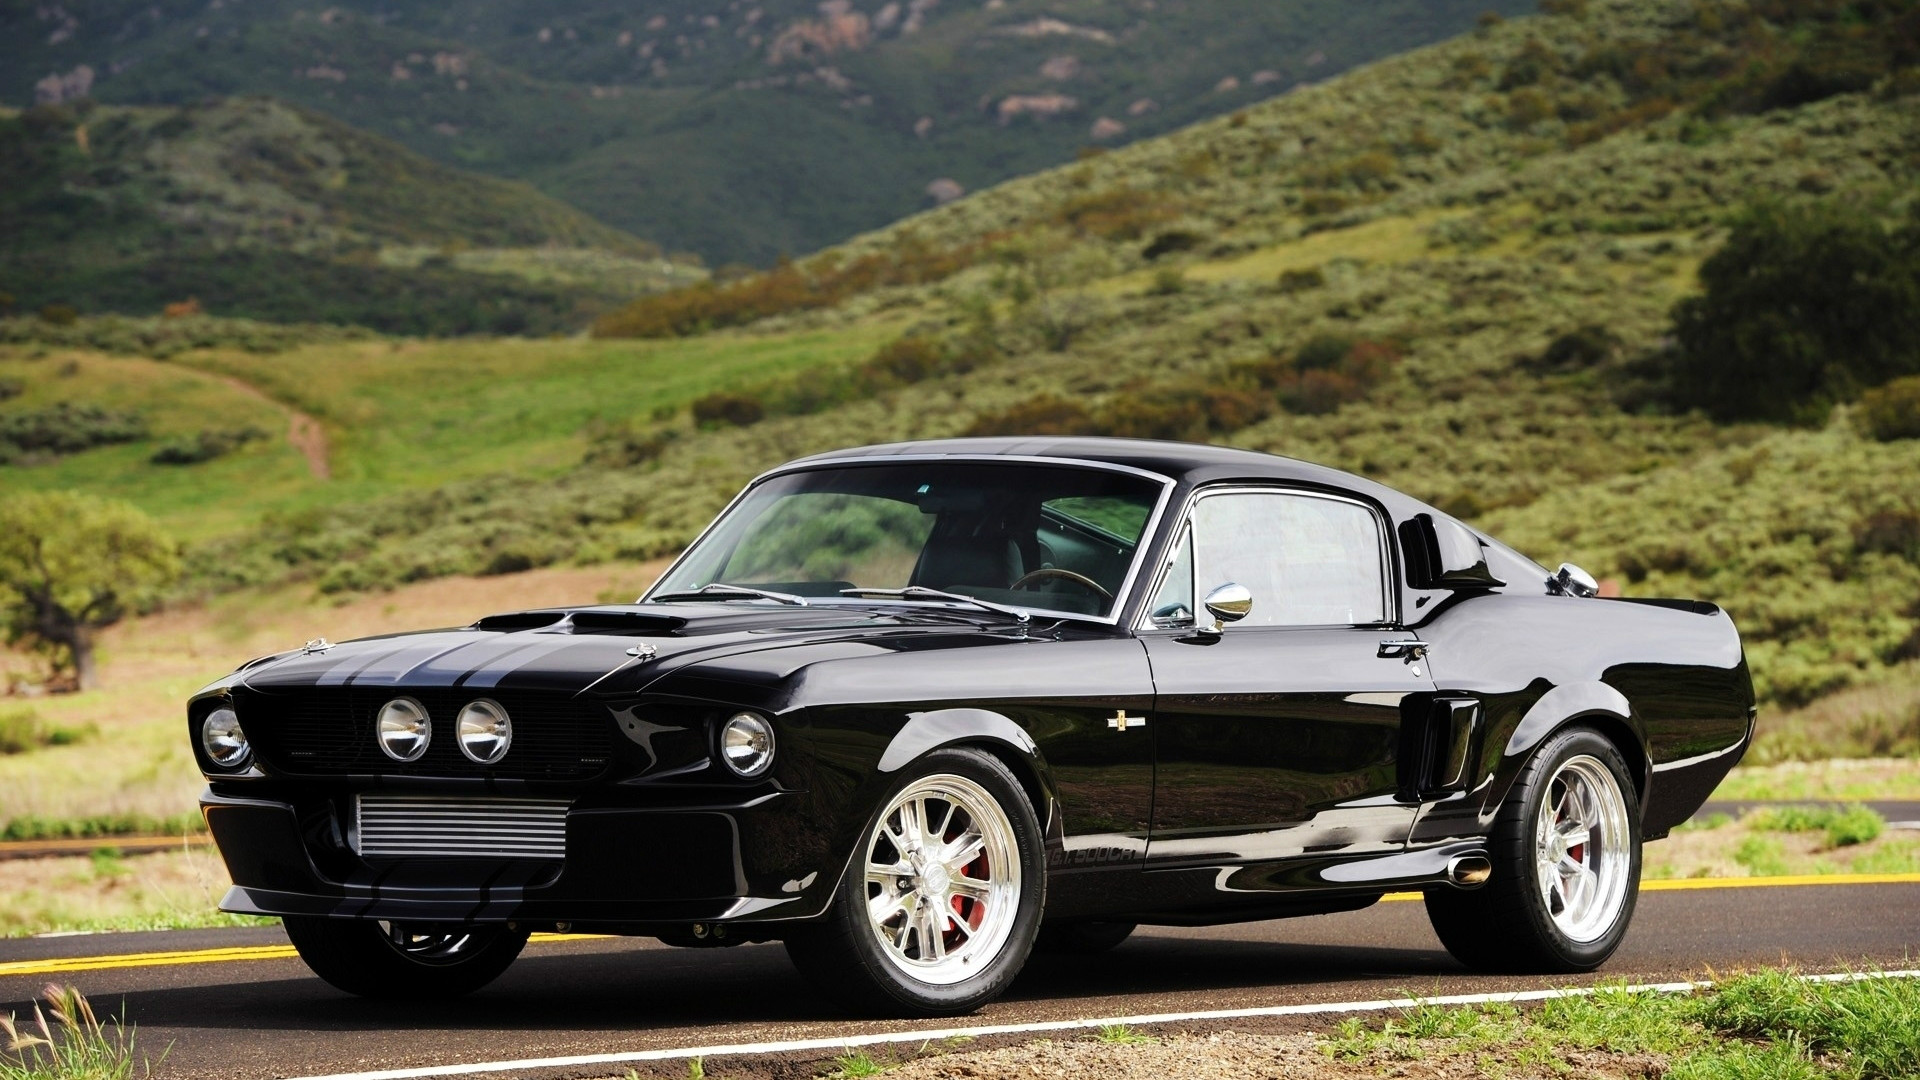 Wallpaper The Terrific Image Is Segment Of Ford Mustang Classic Black